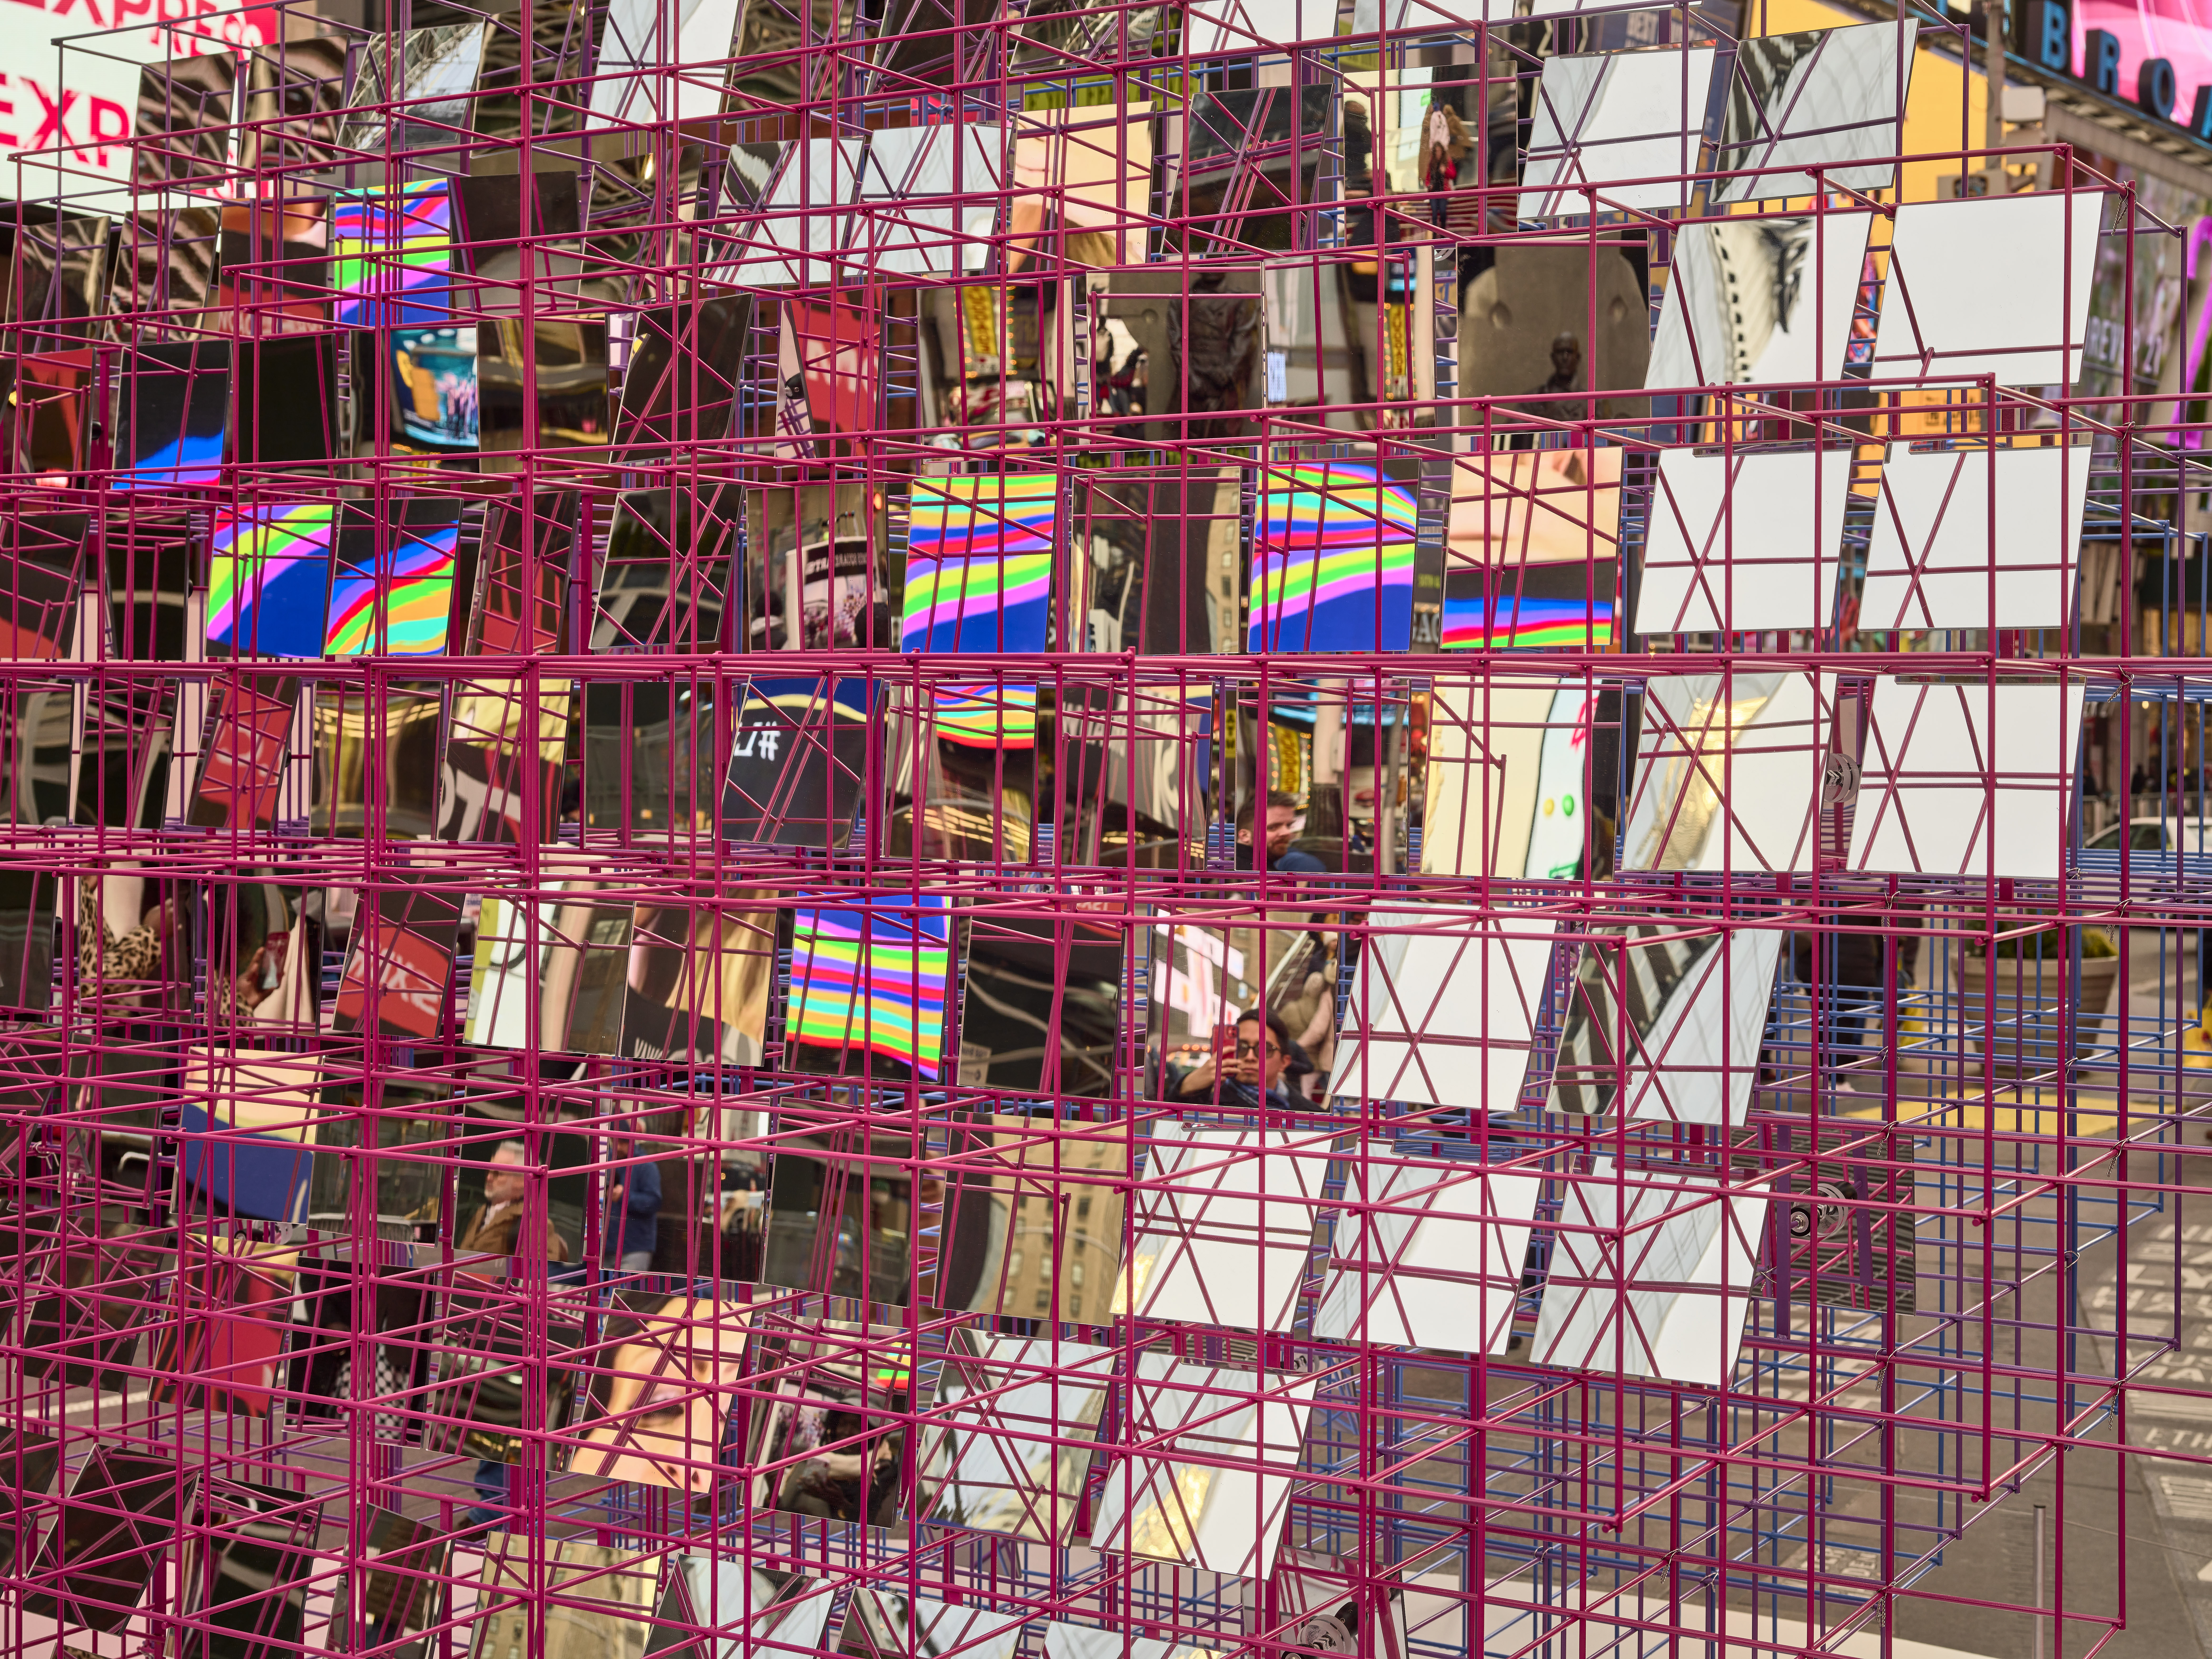 Detail image of public art installation. Red metal rod large grid with square mirrors inside grid reflecting the surroundings.